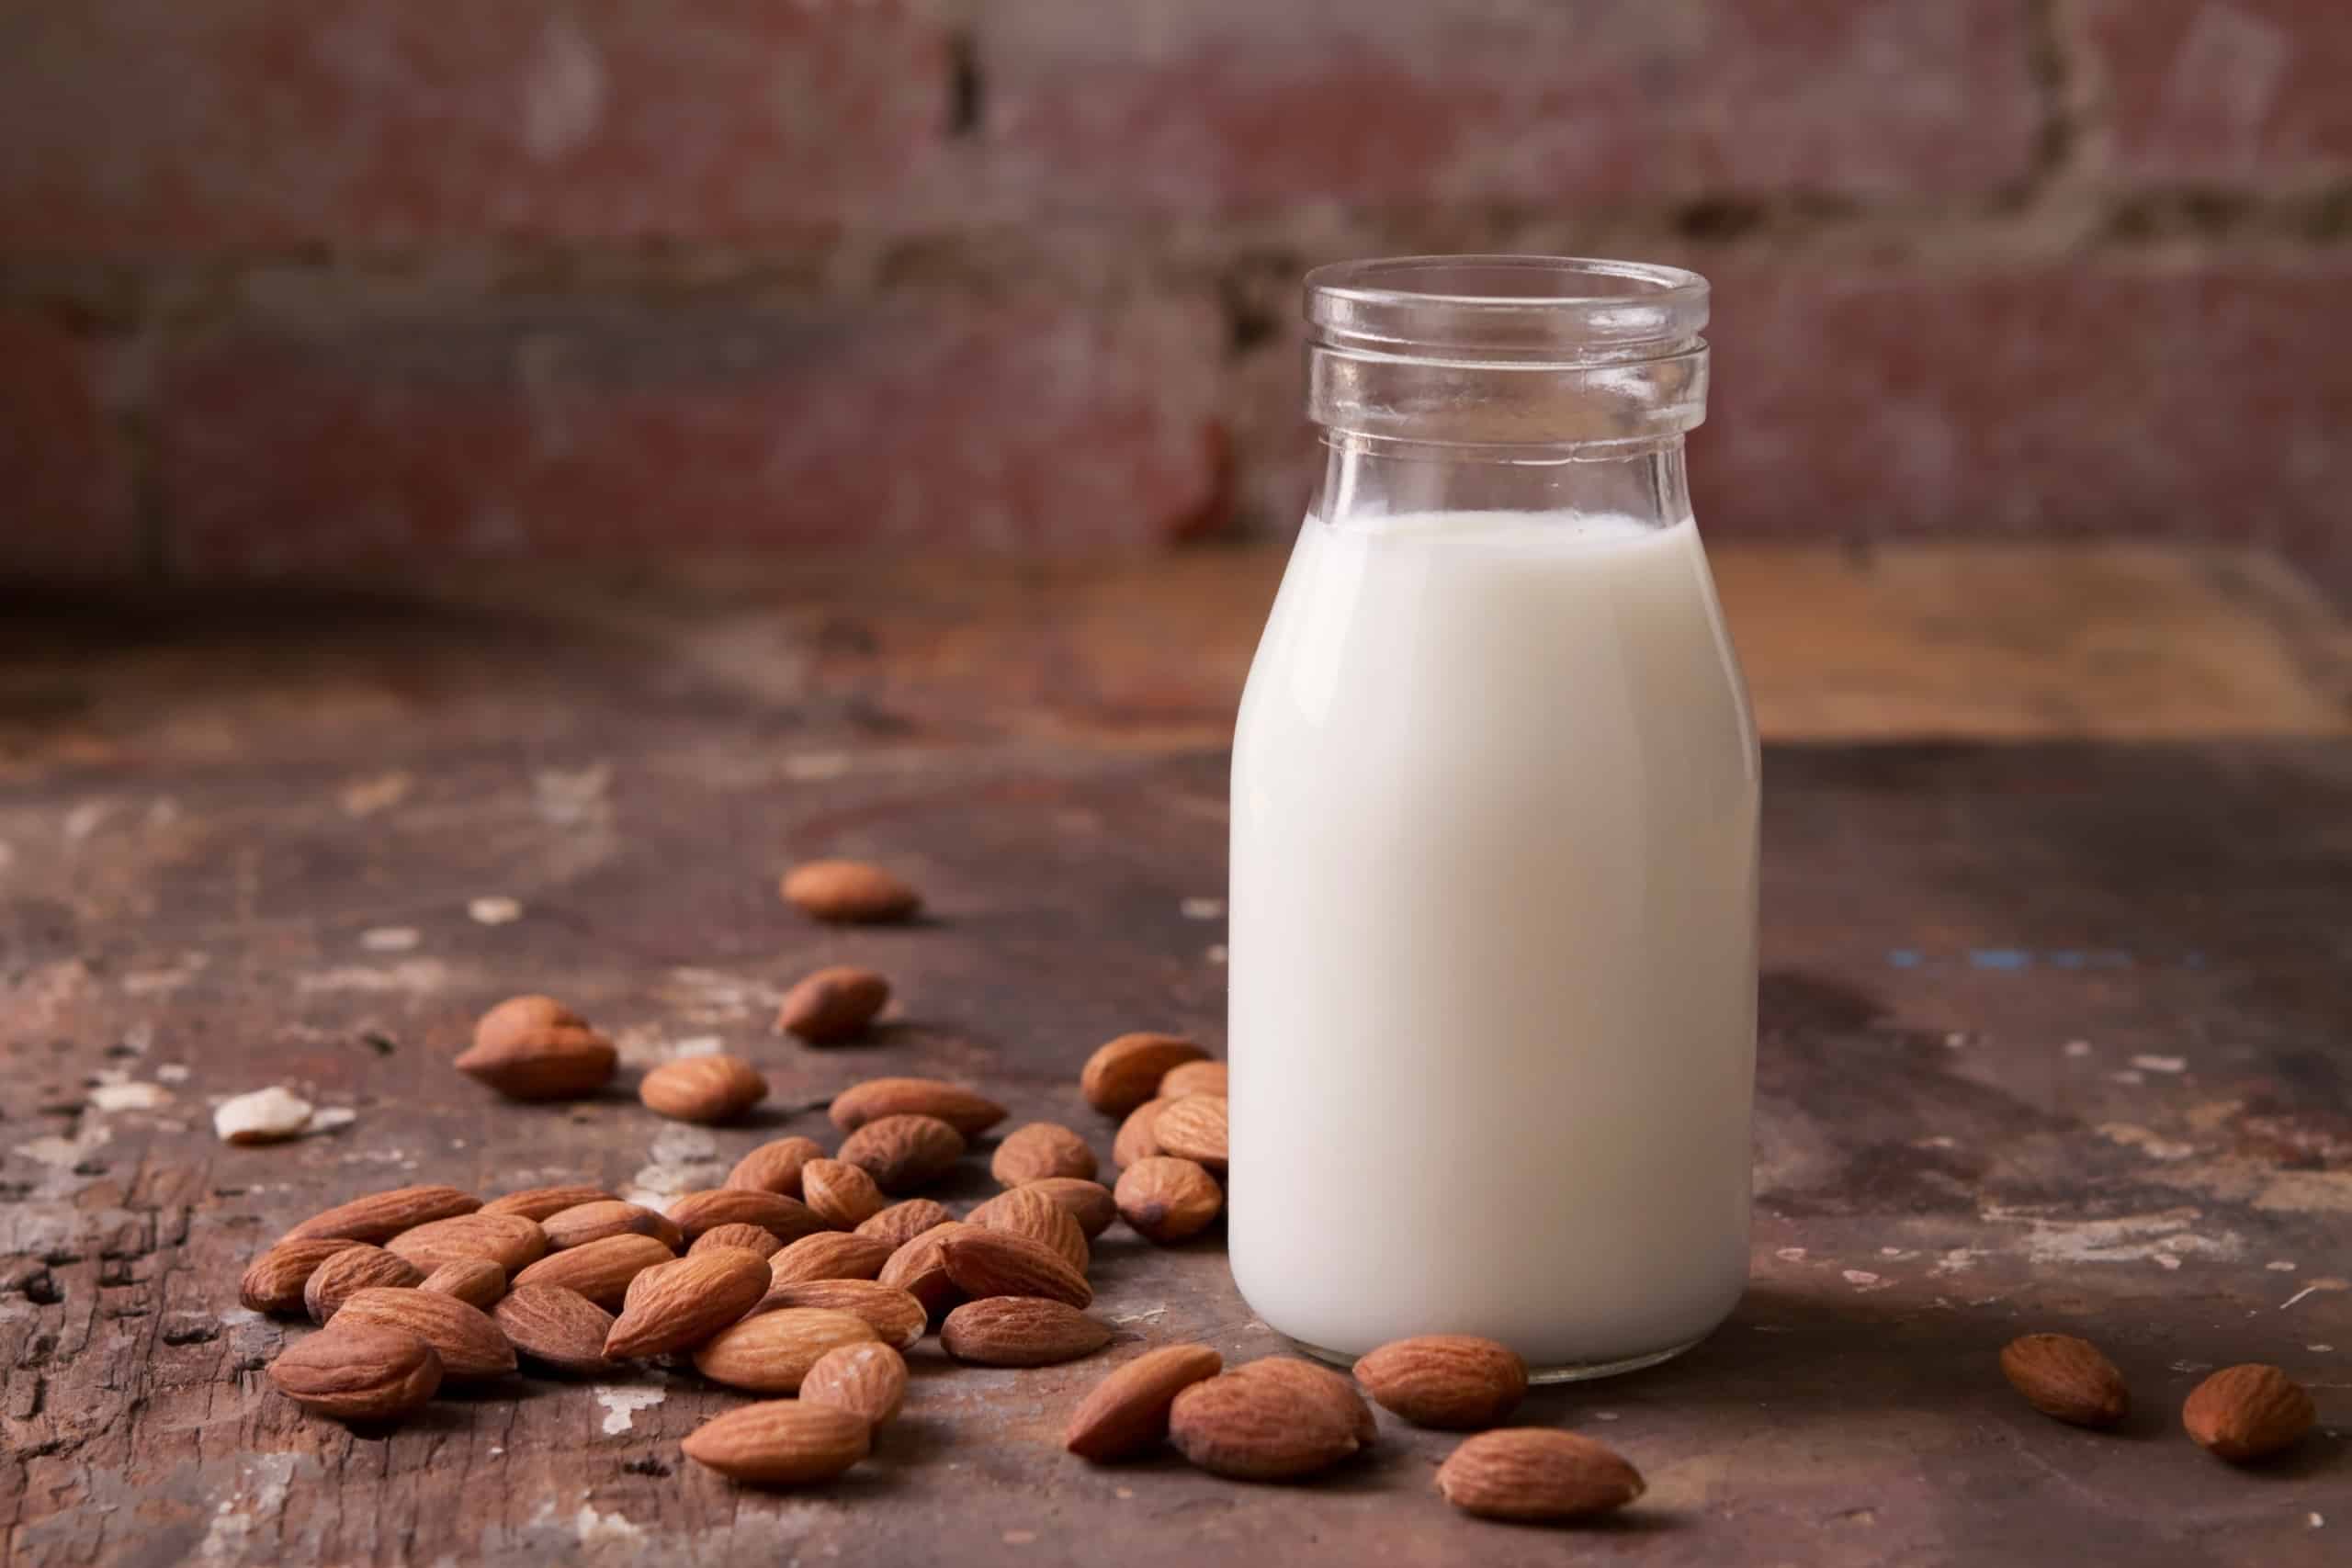 A jar of almond milk with almonds on the table near it.